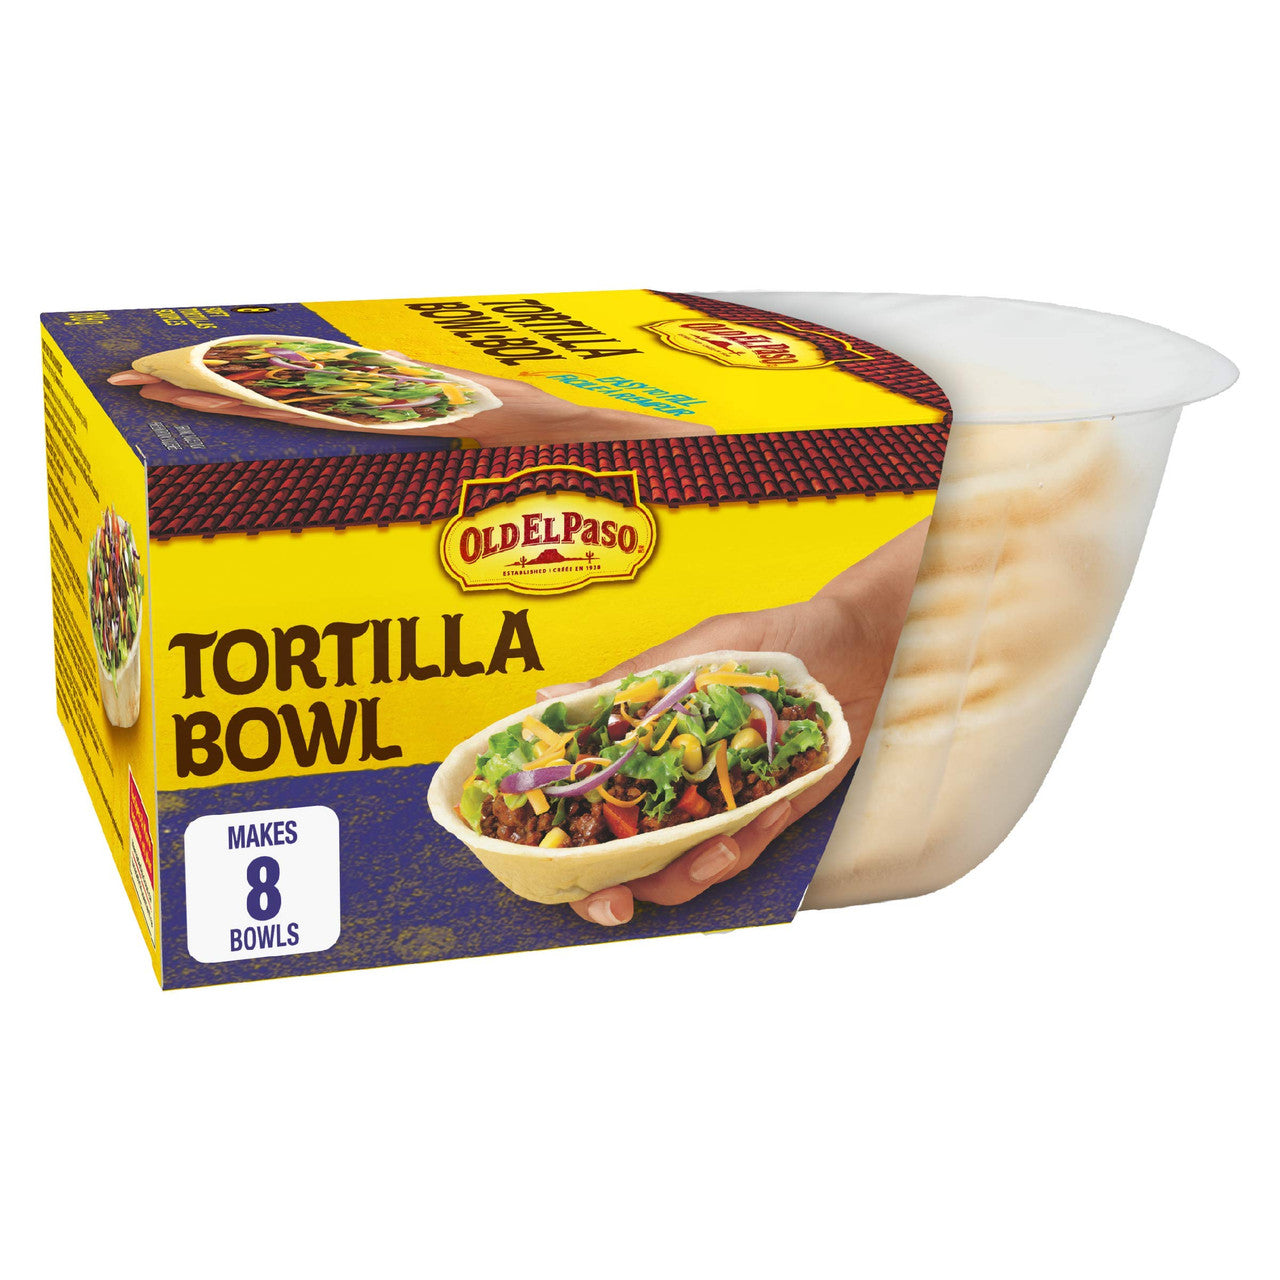 Old El Paso Burrito Dinner Kit, 510g/18 oz {Imported from Canada}